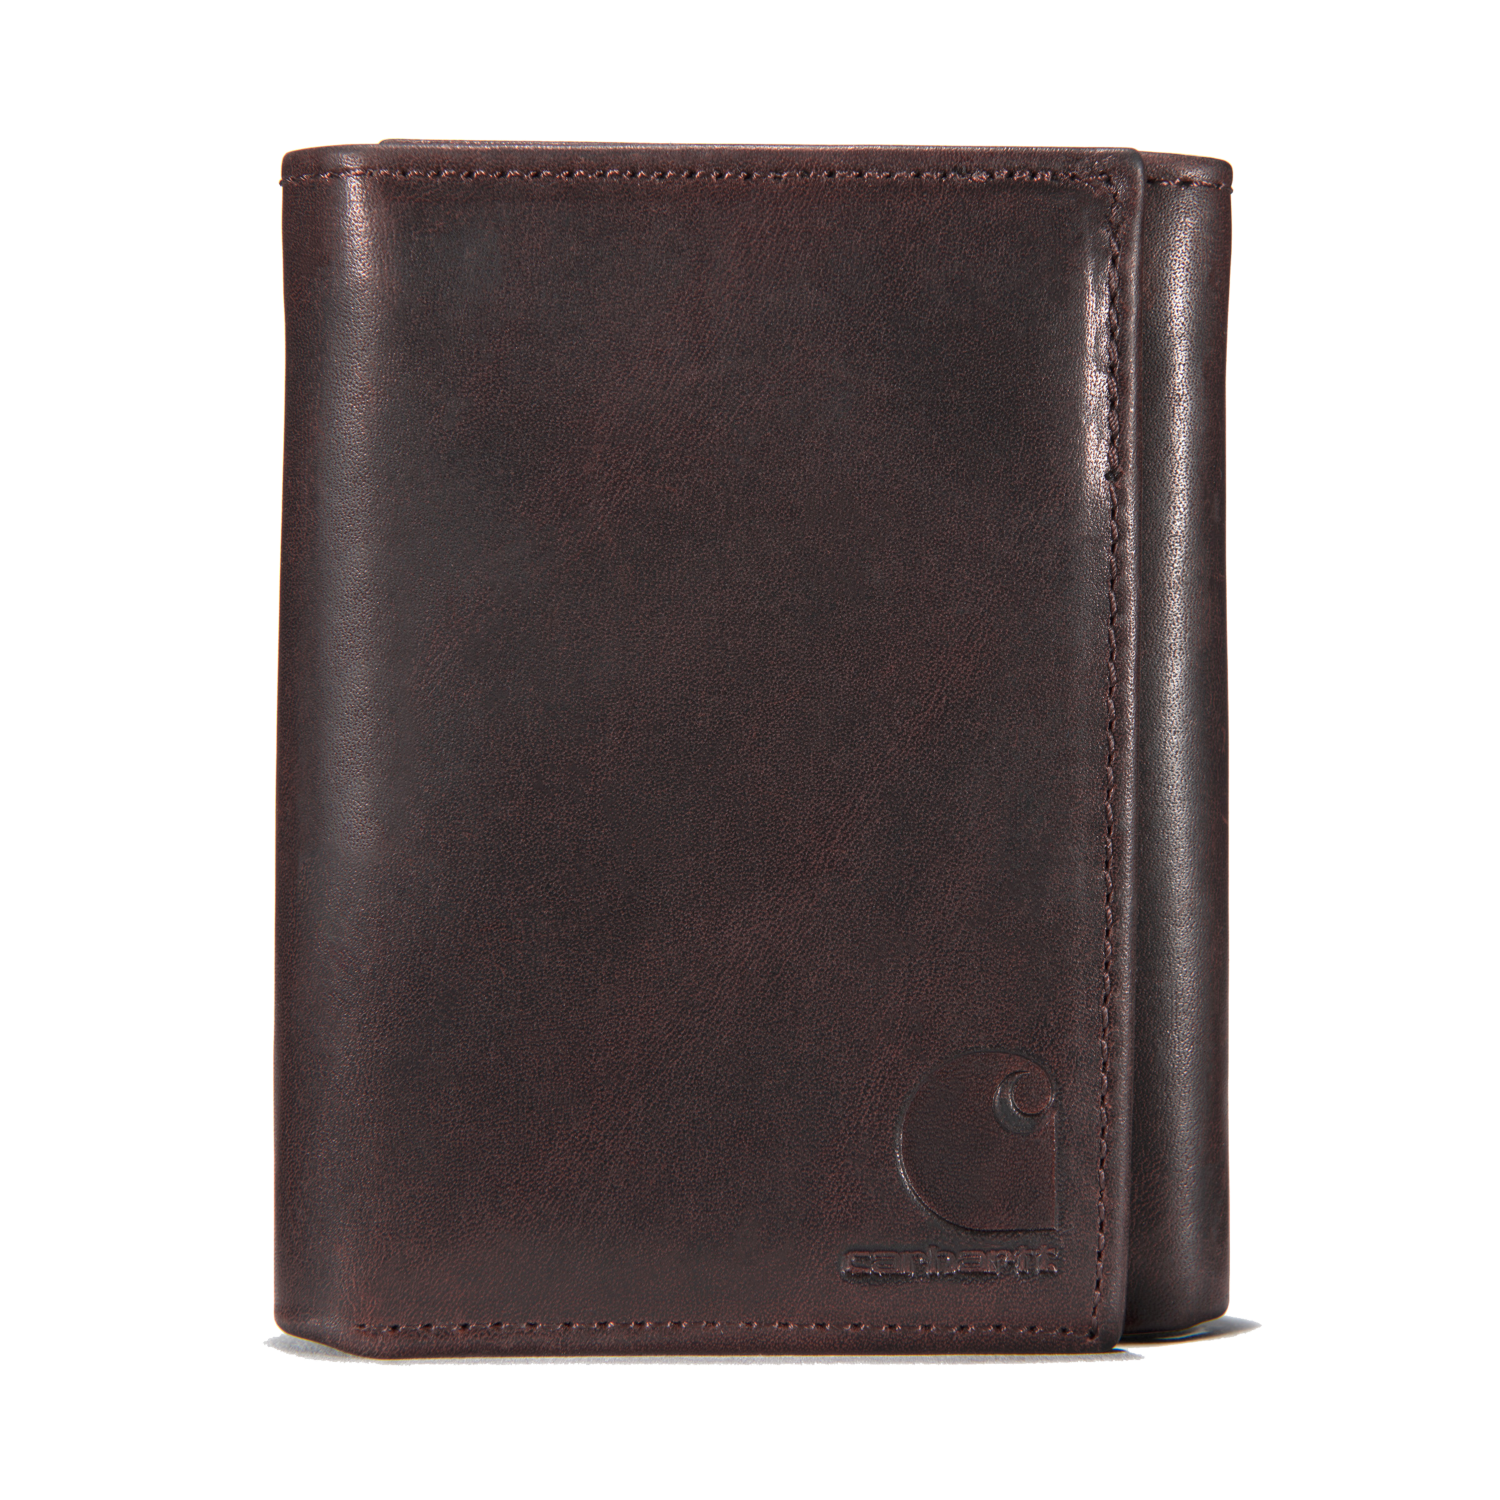 OIL_TAN_LEATHER_TRIFOLD_WALLET_YdB3ziRyVq